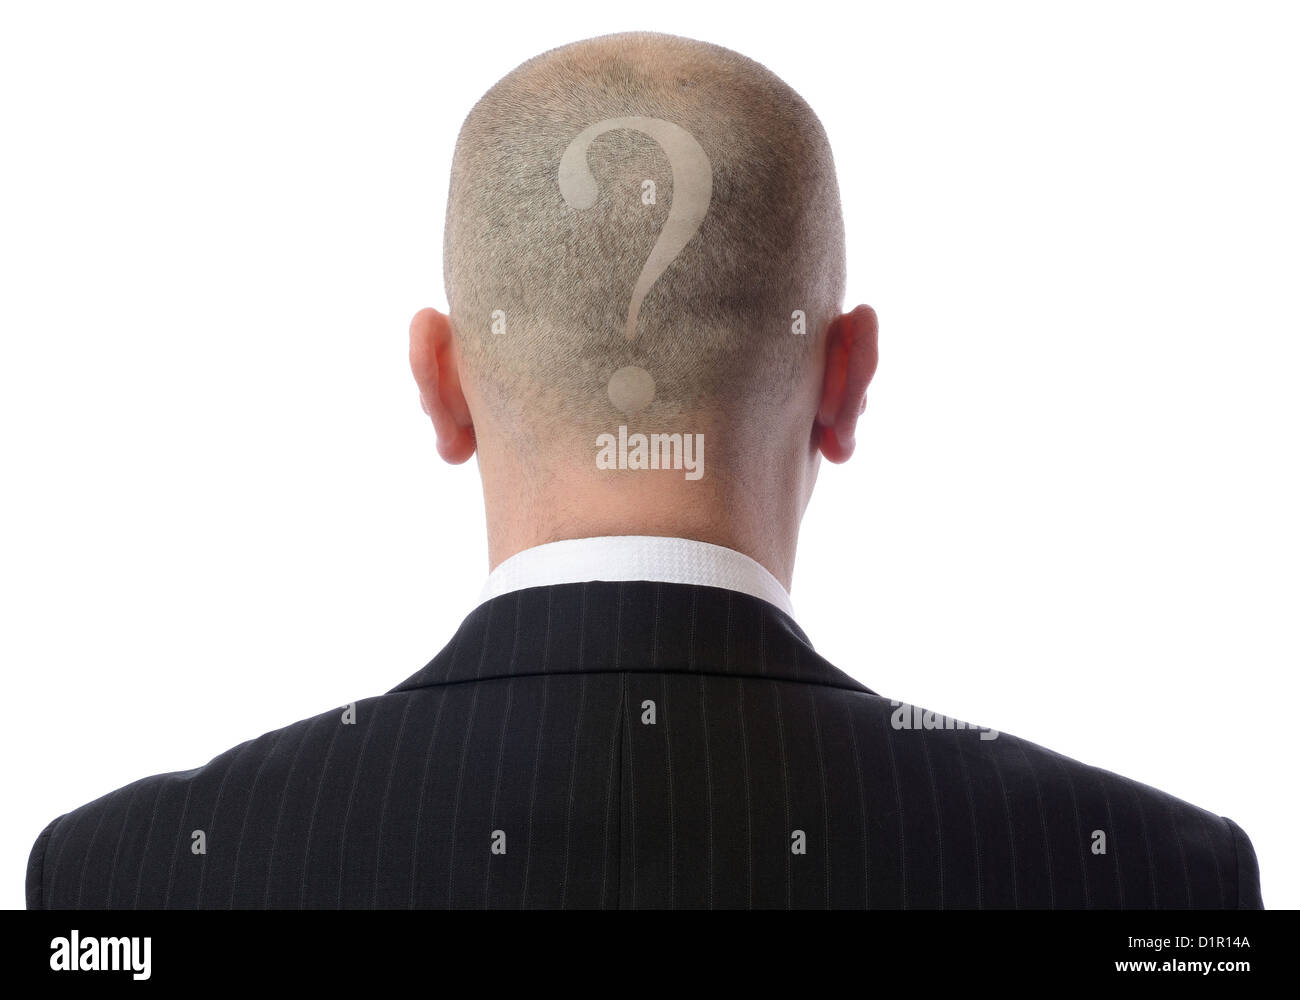 Rear view of bald man with a question mark shaved into hair wearing suit over white background Stock Photo